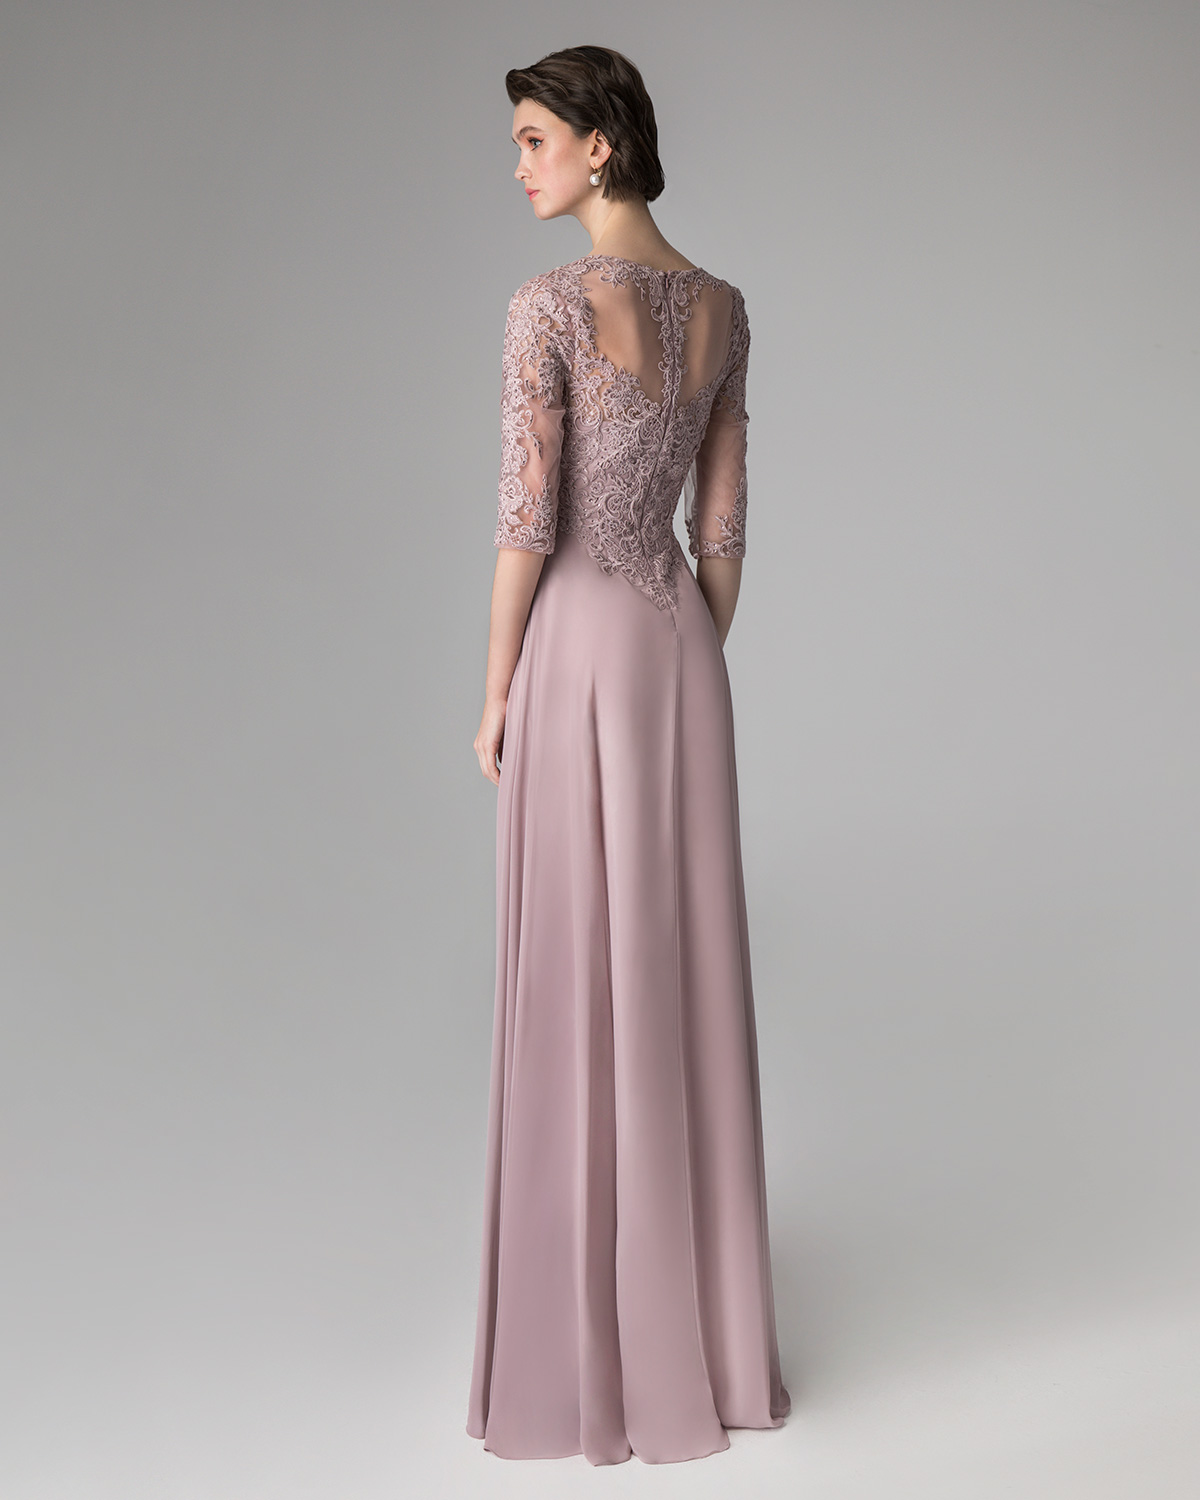 Классические платья / Long evening dress with applique lace on the top and long sleeves